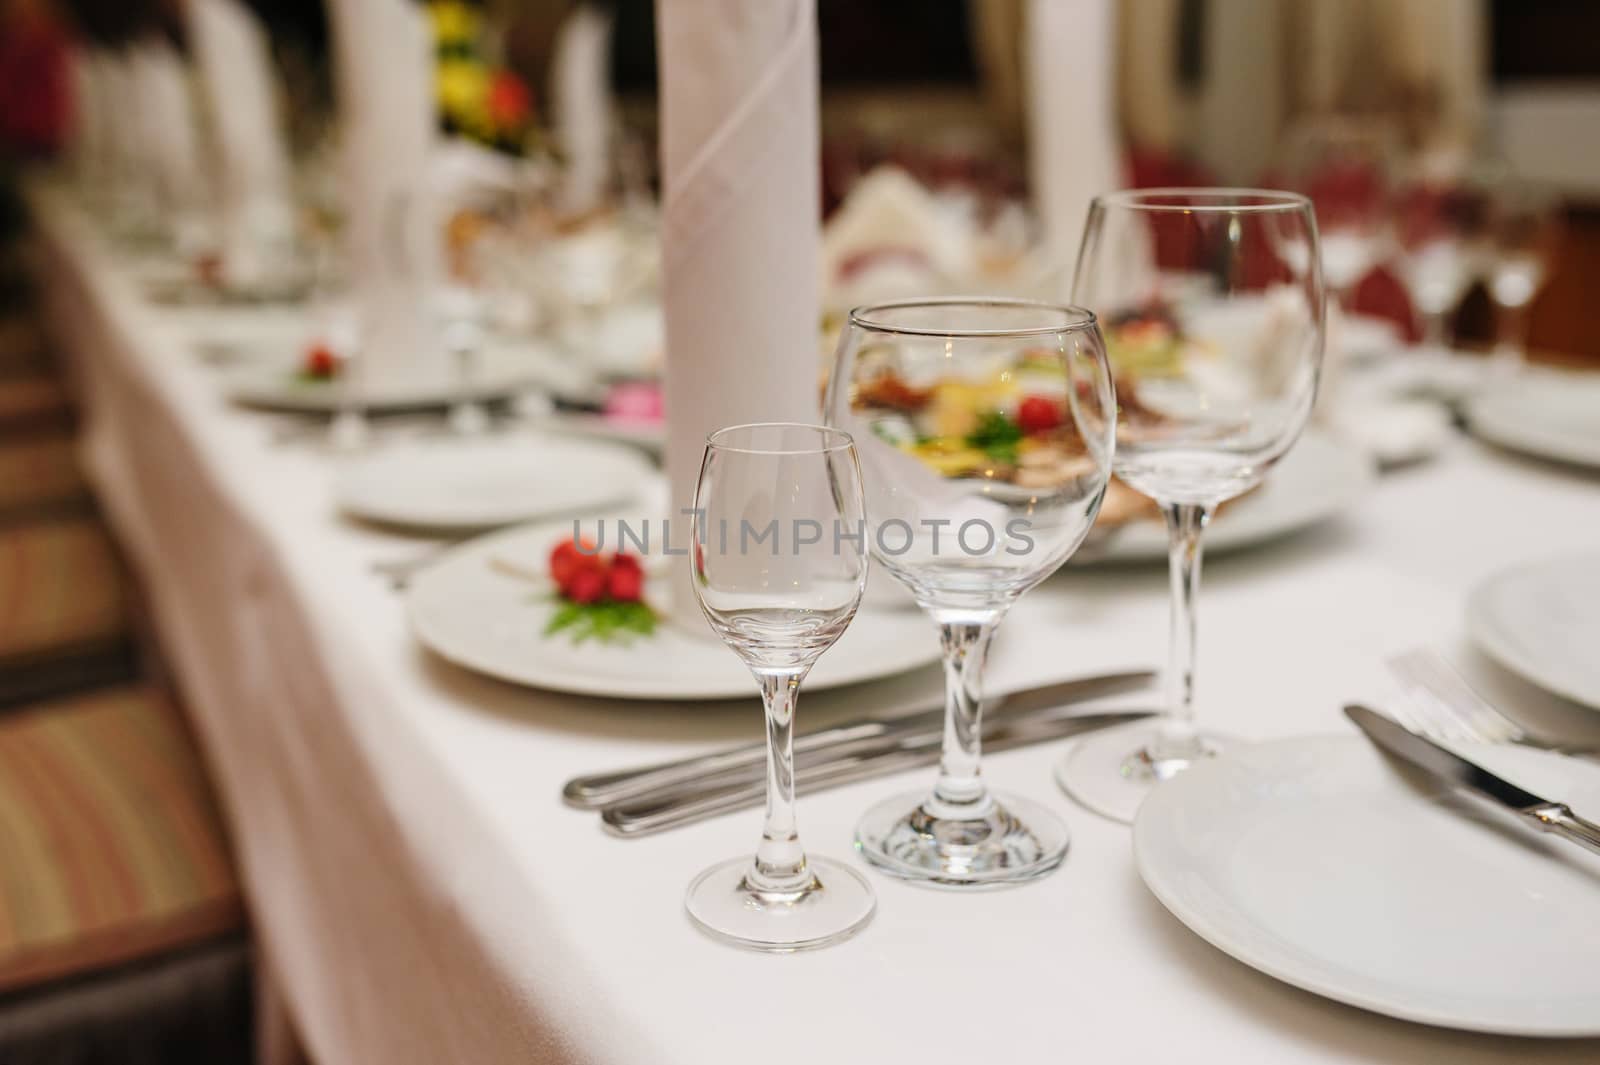 beautiful table setting for a wedding dinner in the restaurant.